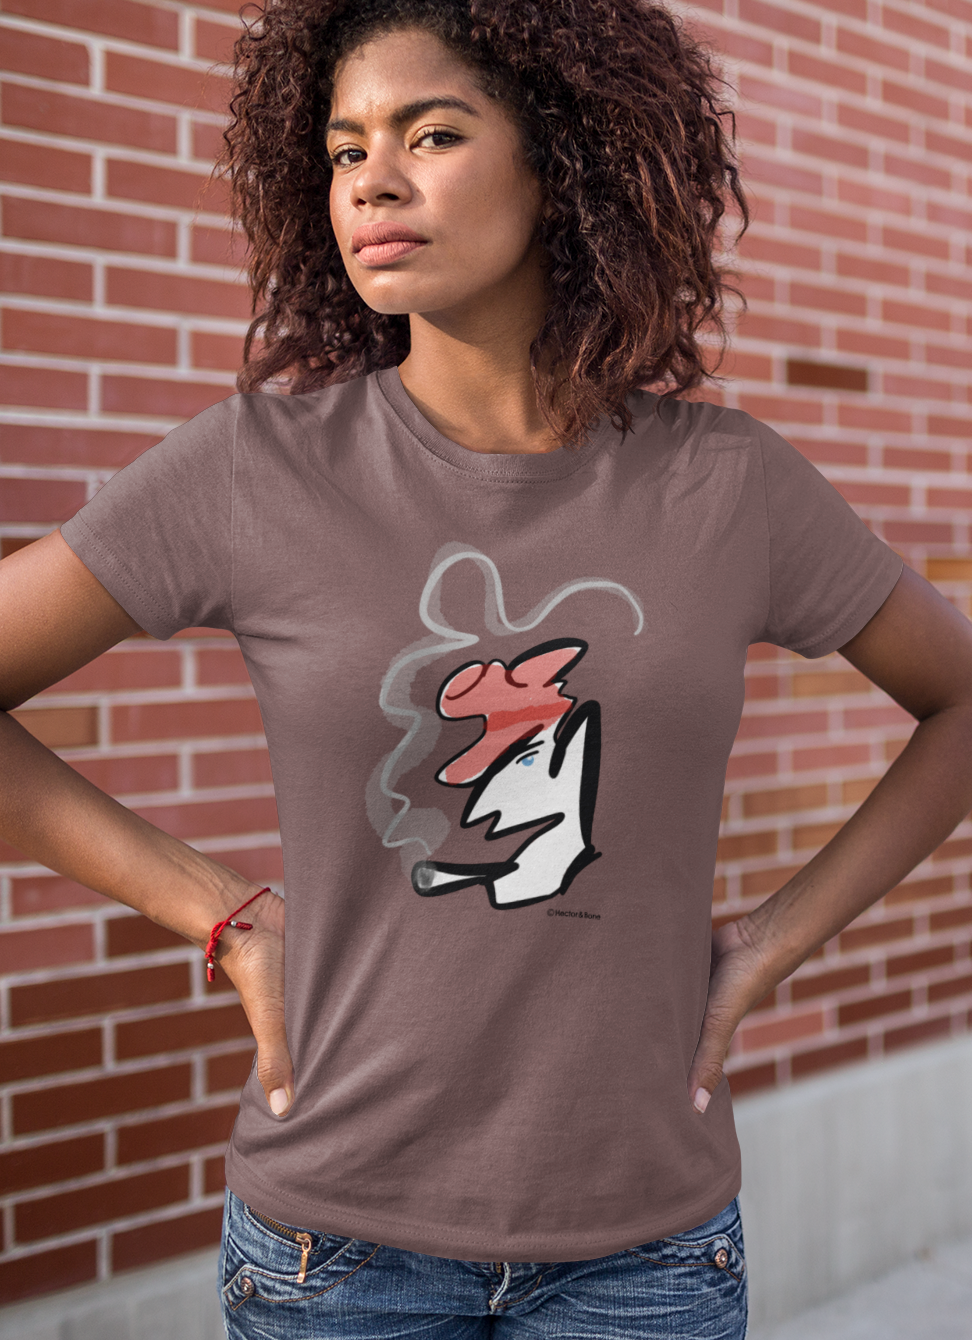 Young woman wearing a stylised illustrated design of Parisian smoking man portrait on a coffee colour vegan cotton t-shirt by Hector and Bone